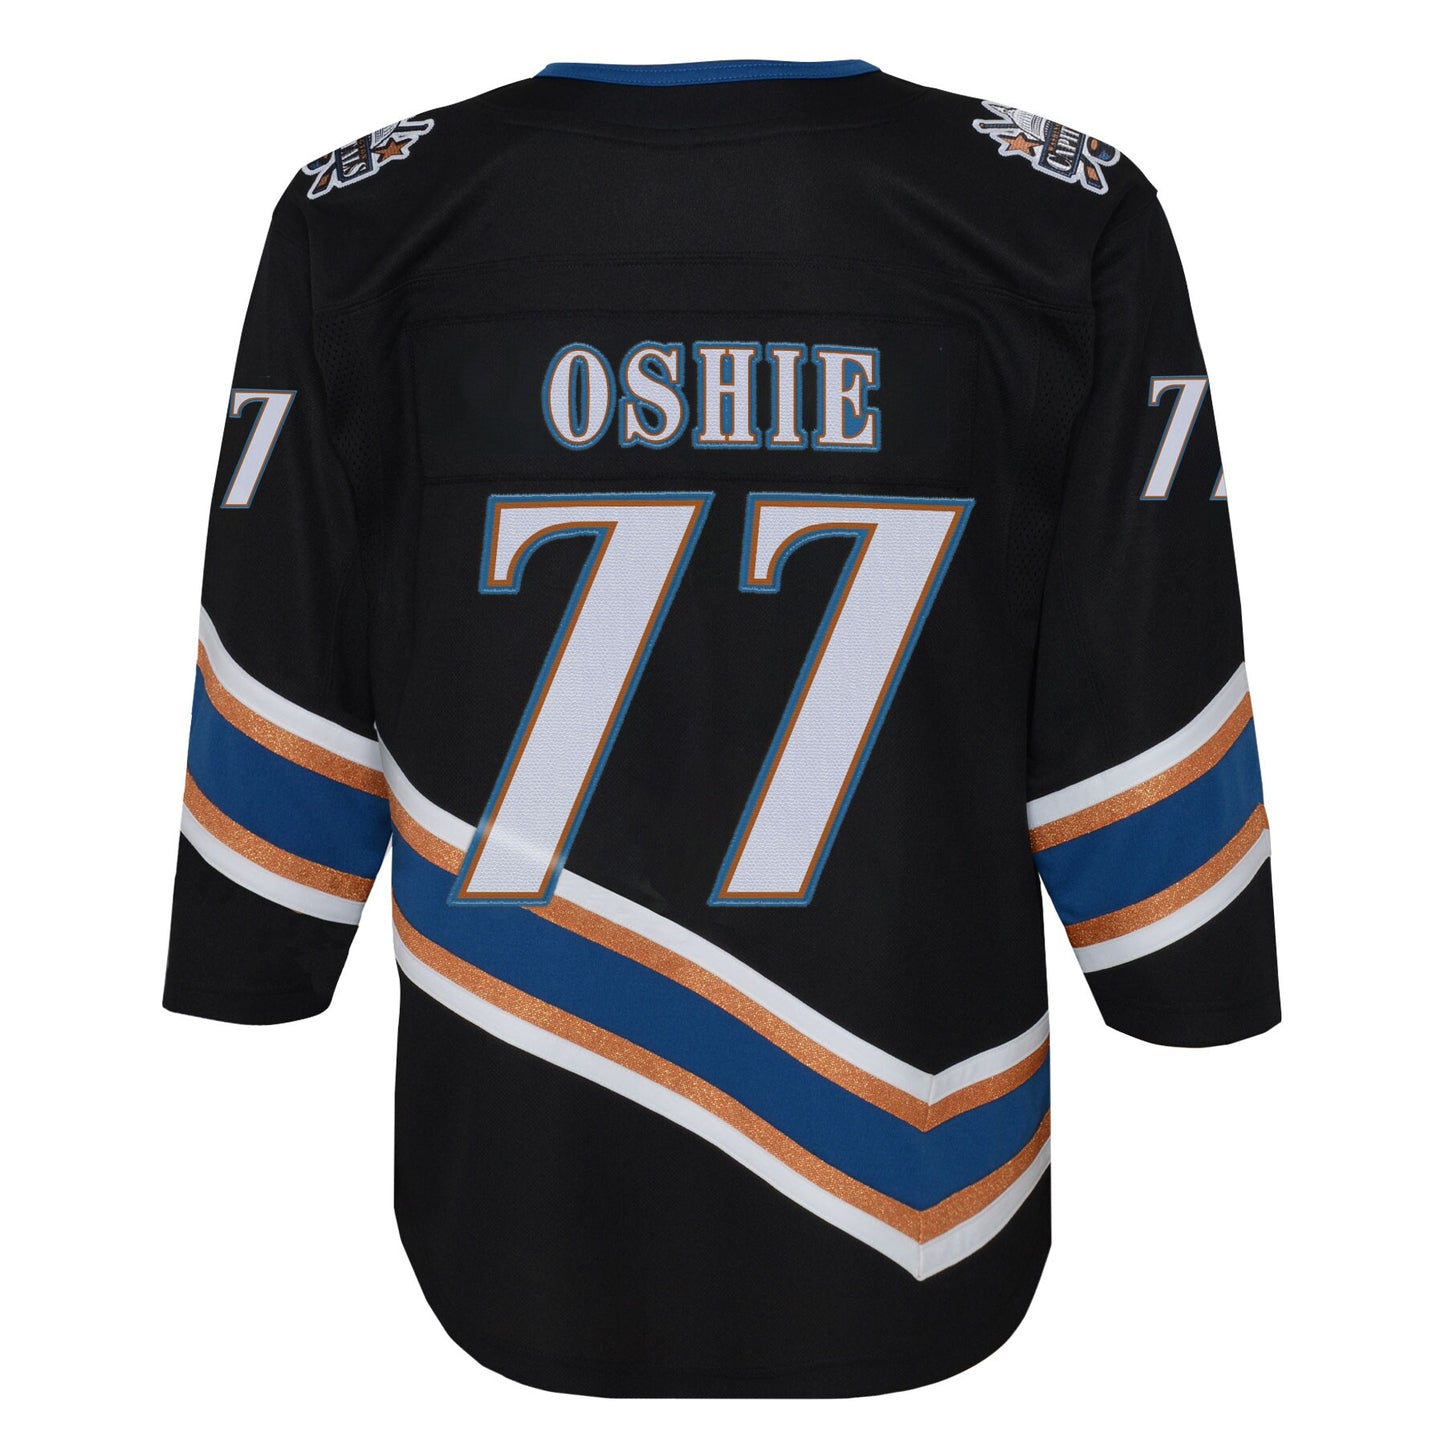 TJ Oshie Washington Capitals Youth Special Edition 2.0 Premier Player Jersey - Black